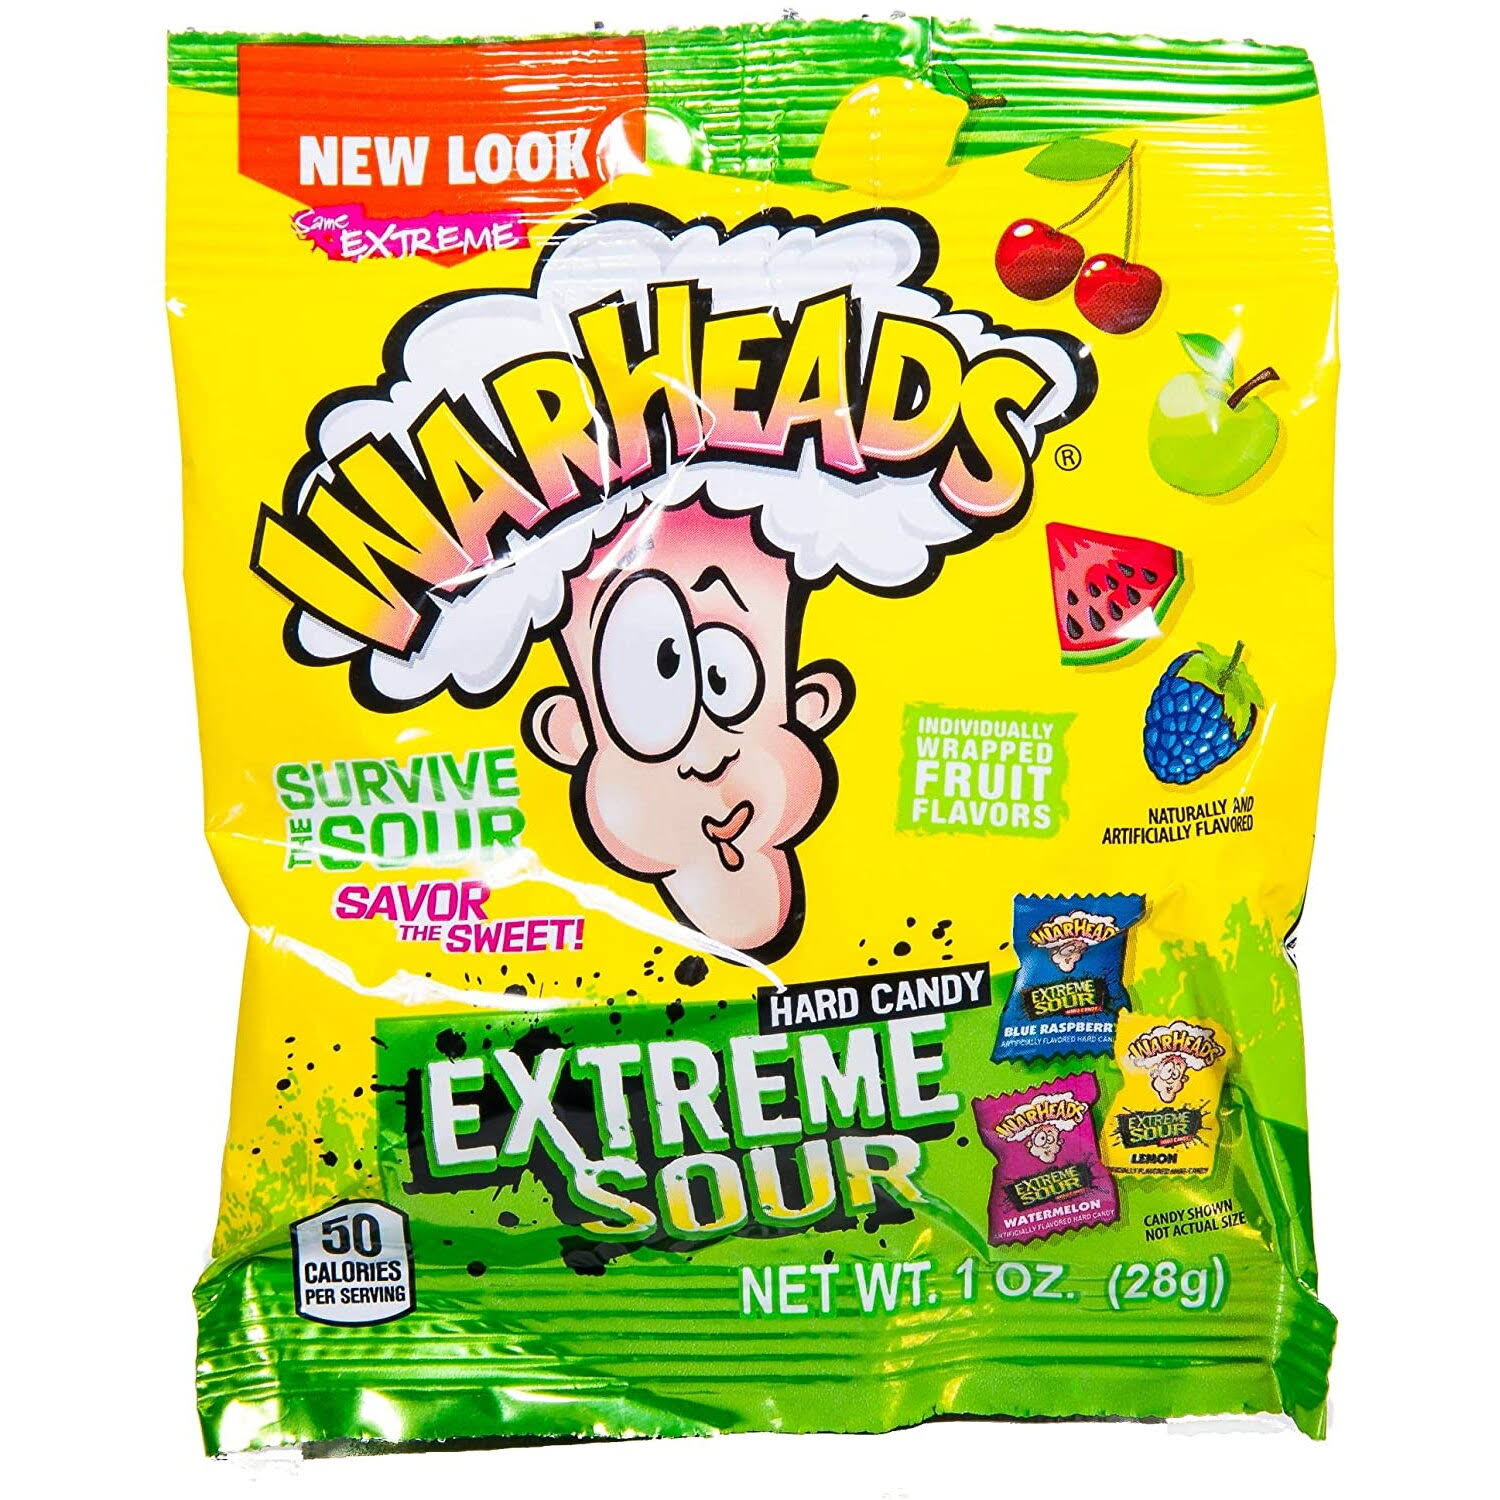 WarHeads Hard Candy, Extreme Sour, Assorted Flavors - 1 oz